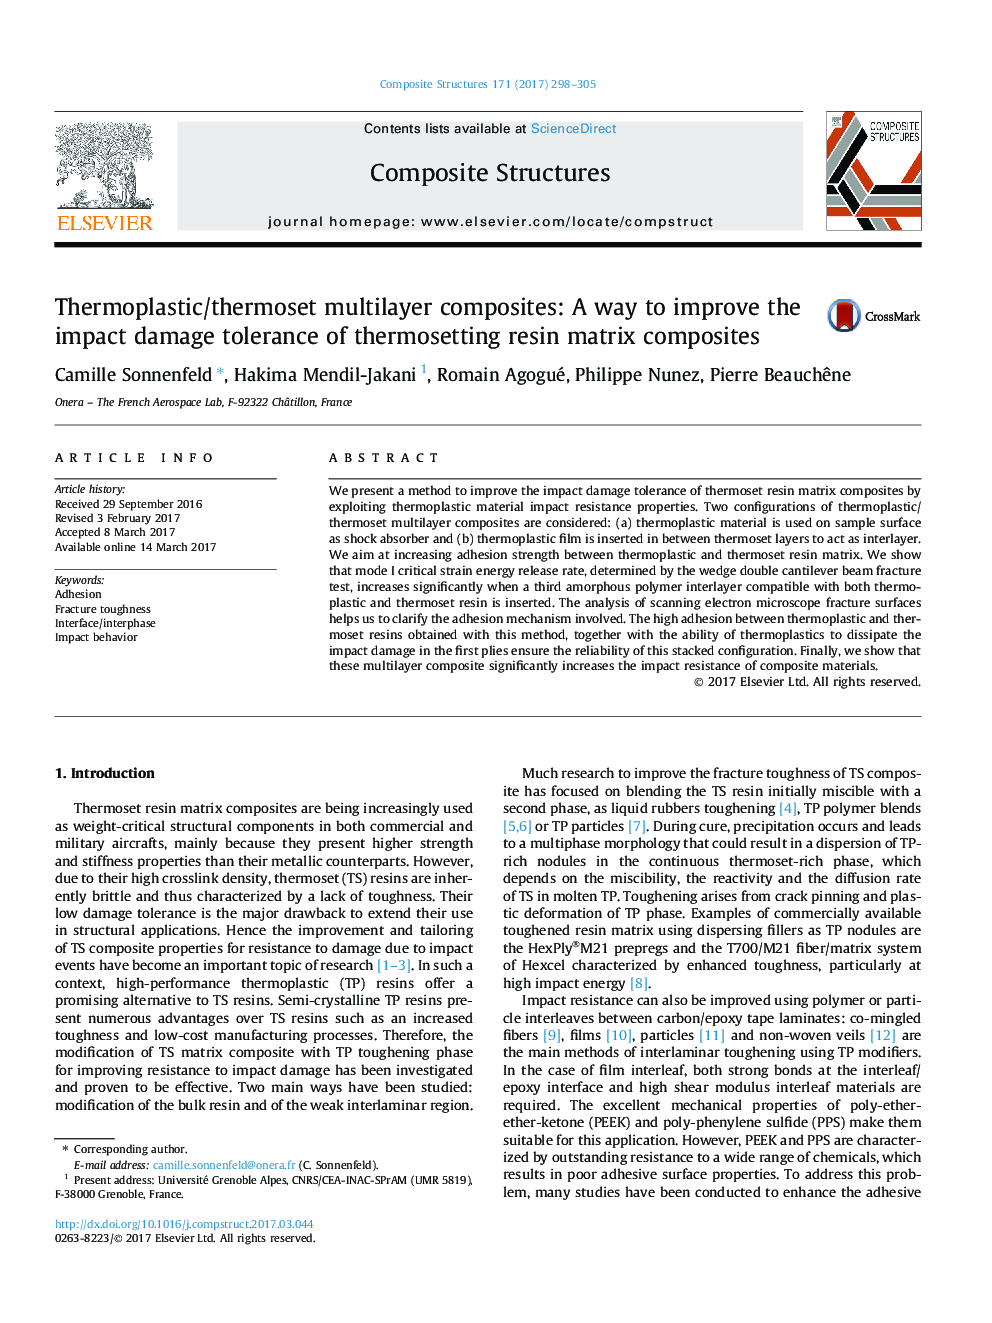 Thermoplastic/thermoset multilayer composites: A way to improve the impact damage tolerance of thermosetting resin matrix composites